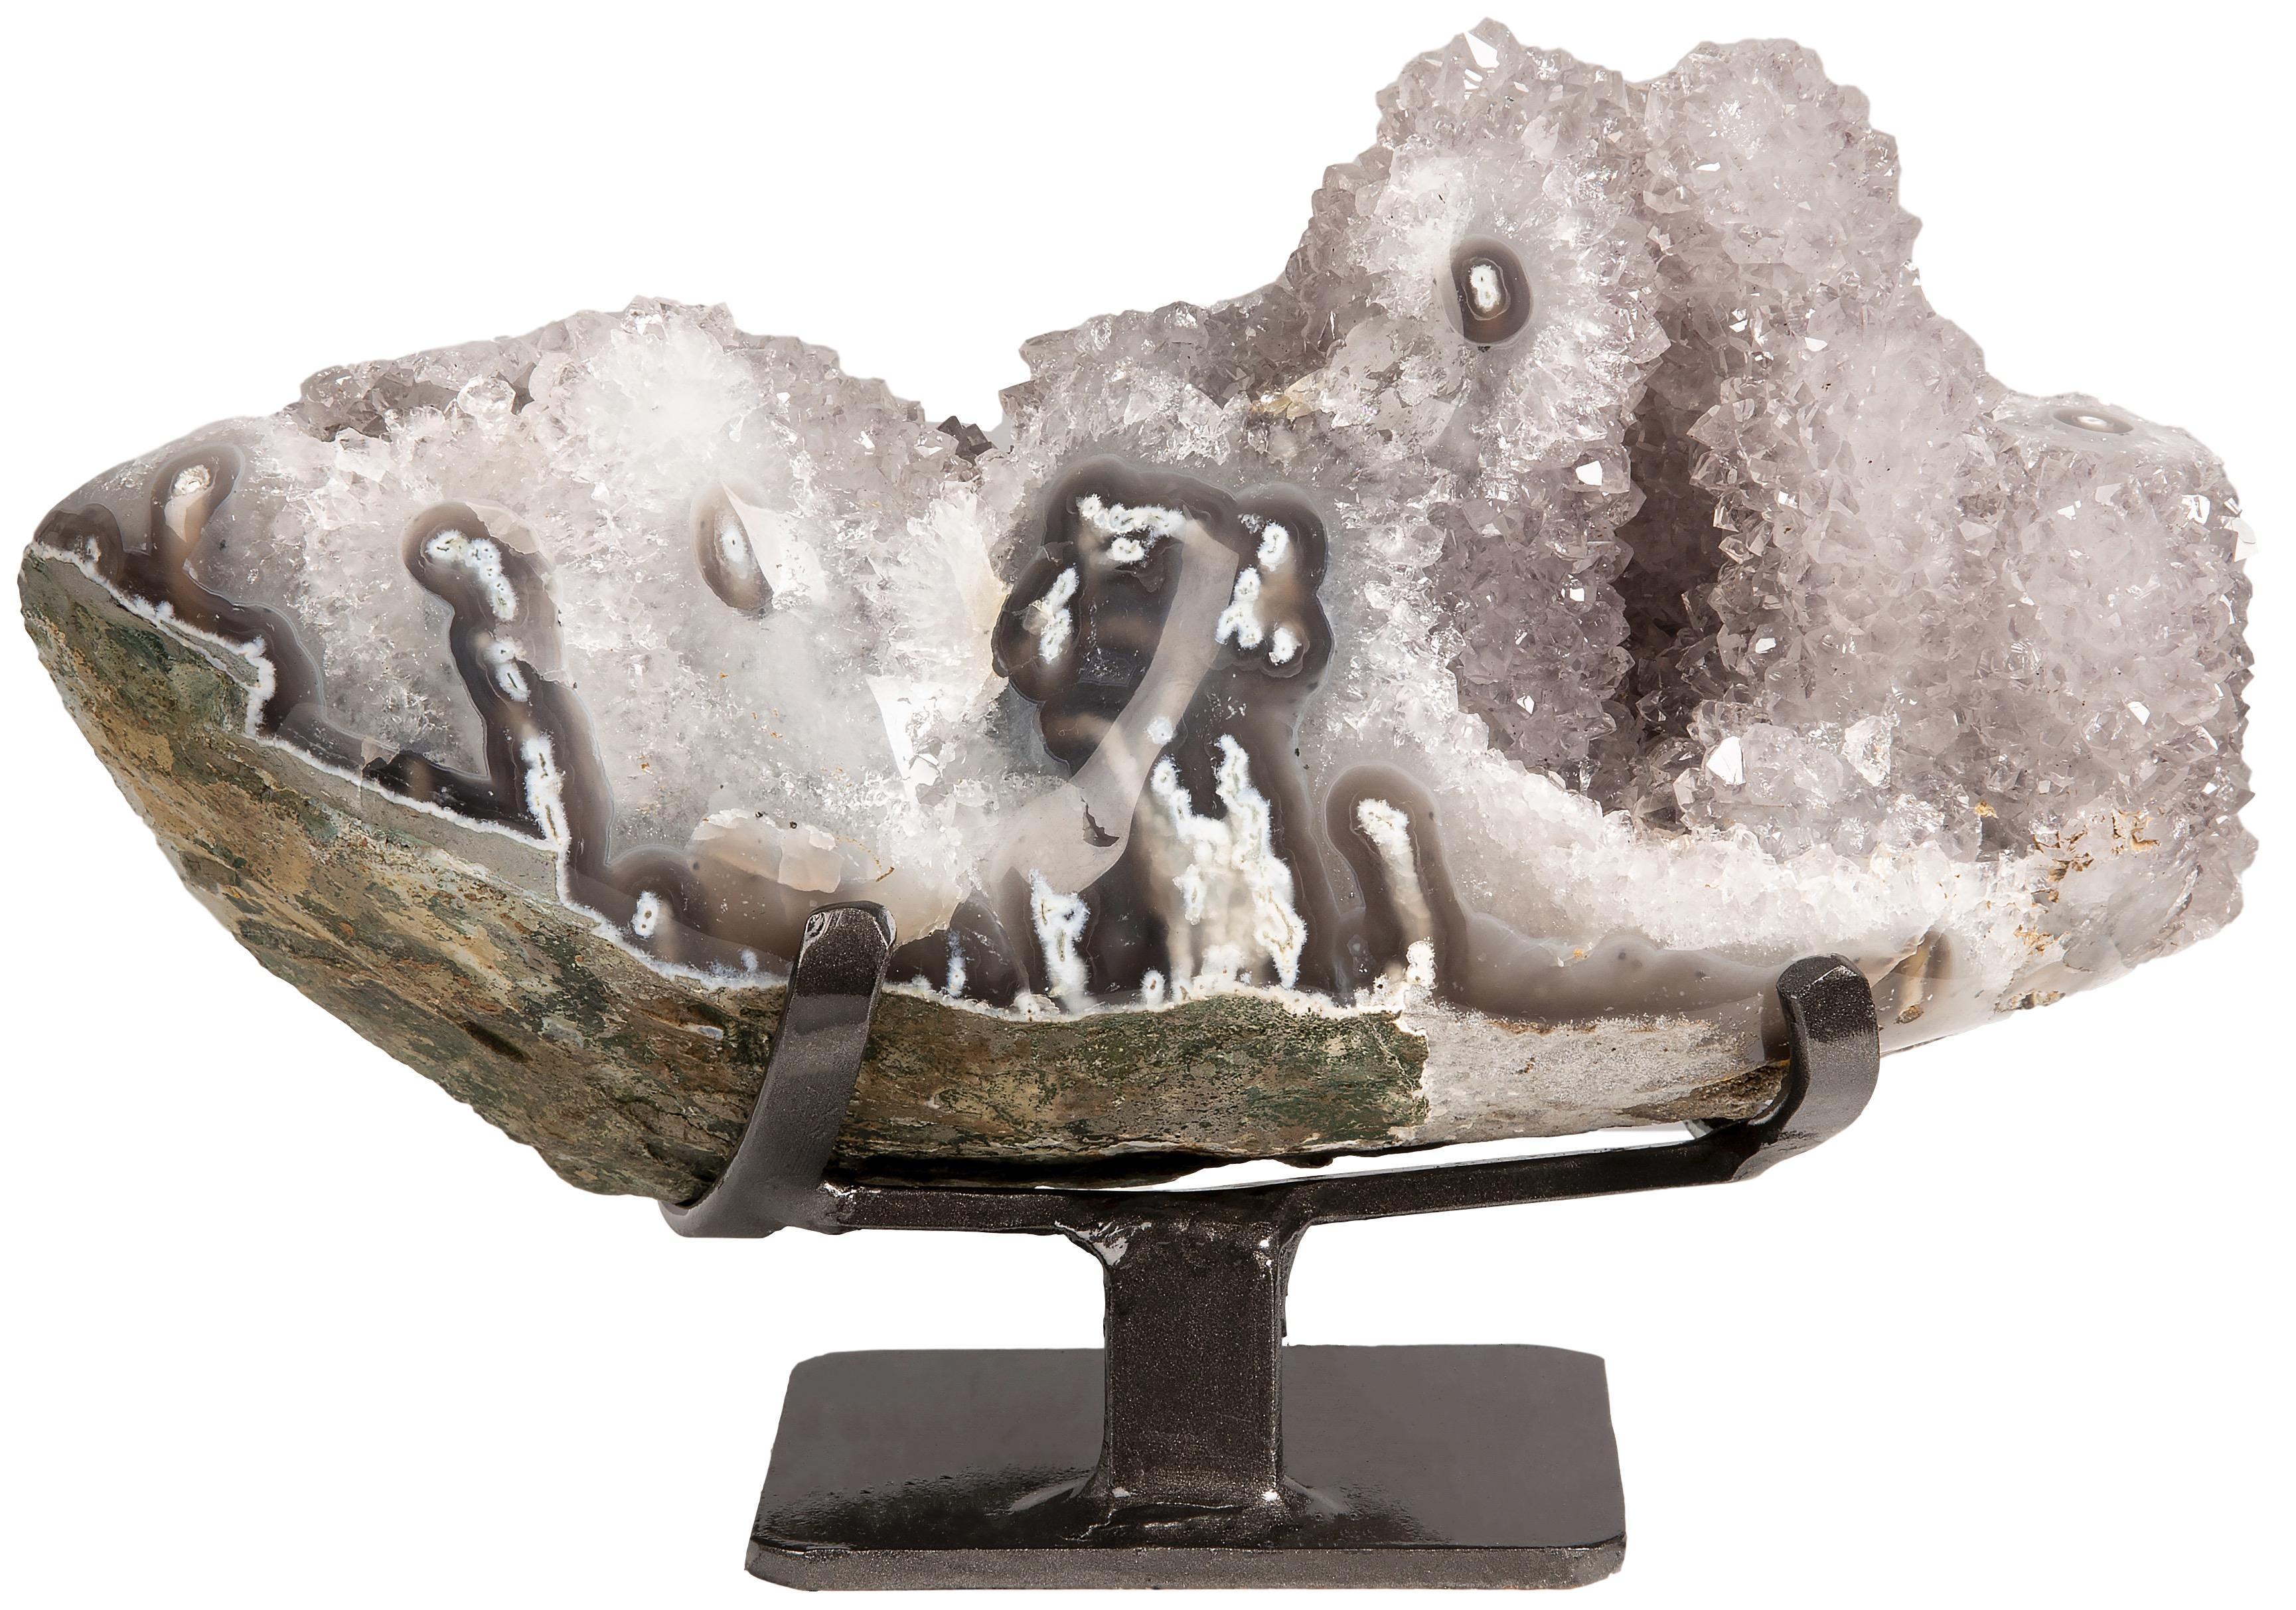 Uruguayan Stunning White Quartz with Grey/Brown Druze Stalactite Formations on Metal Stand